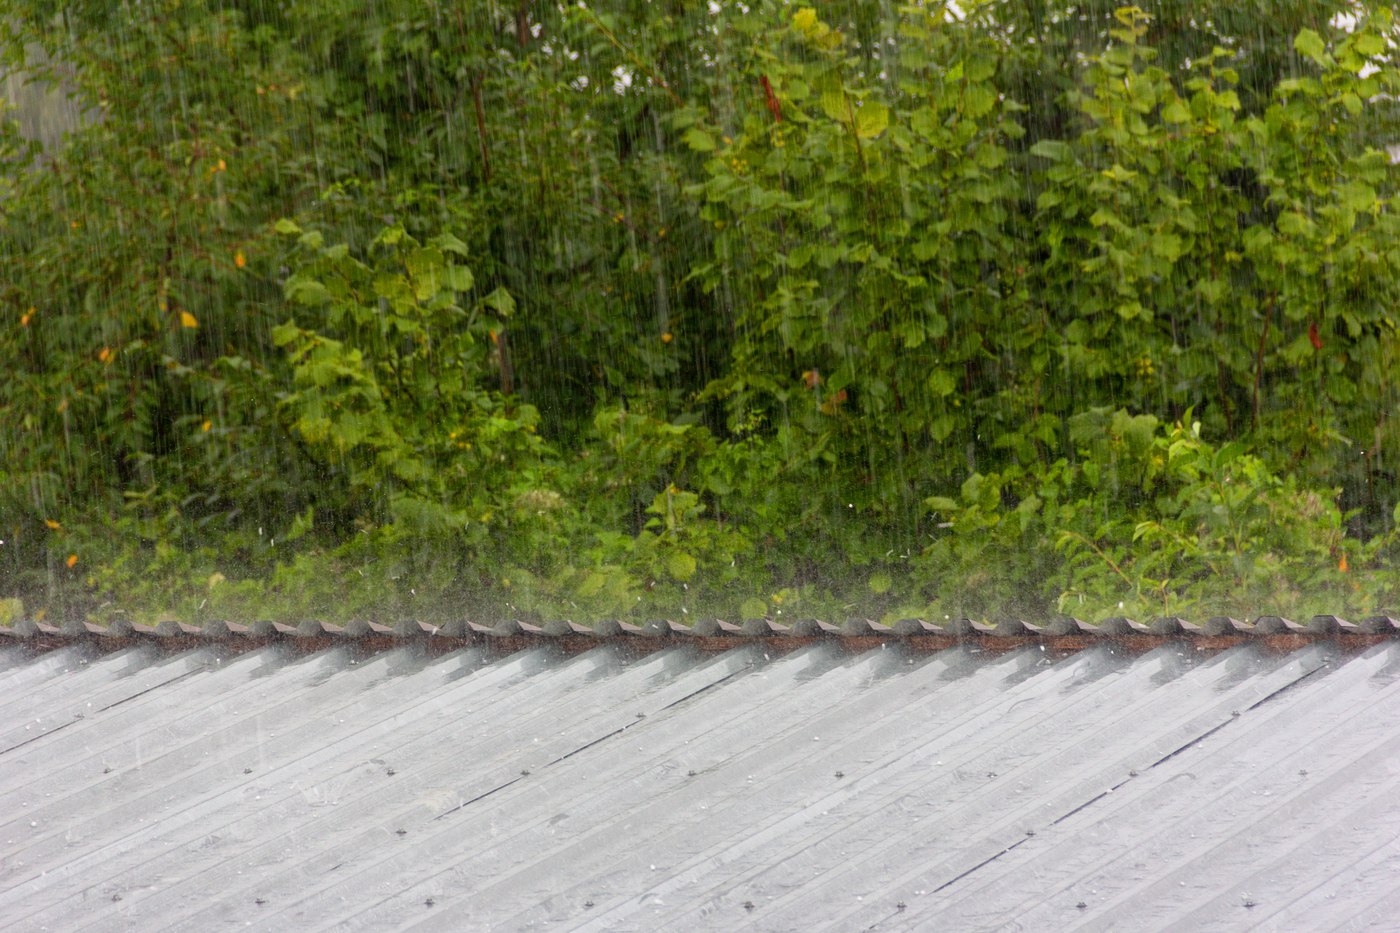 Small hail hitting metal roof